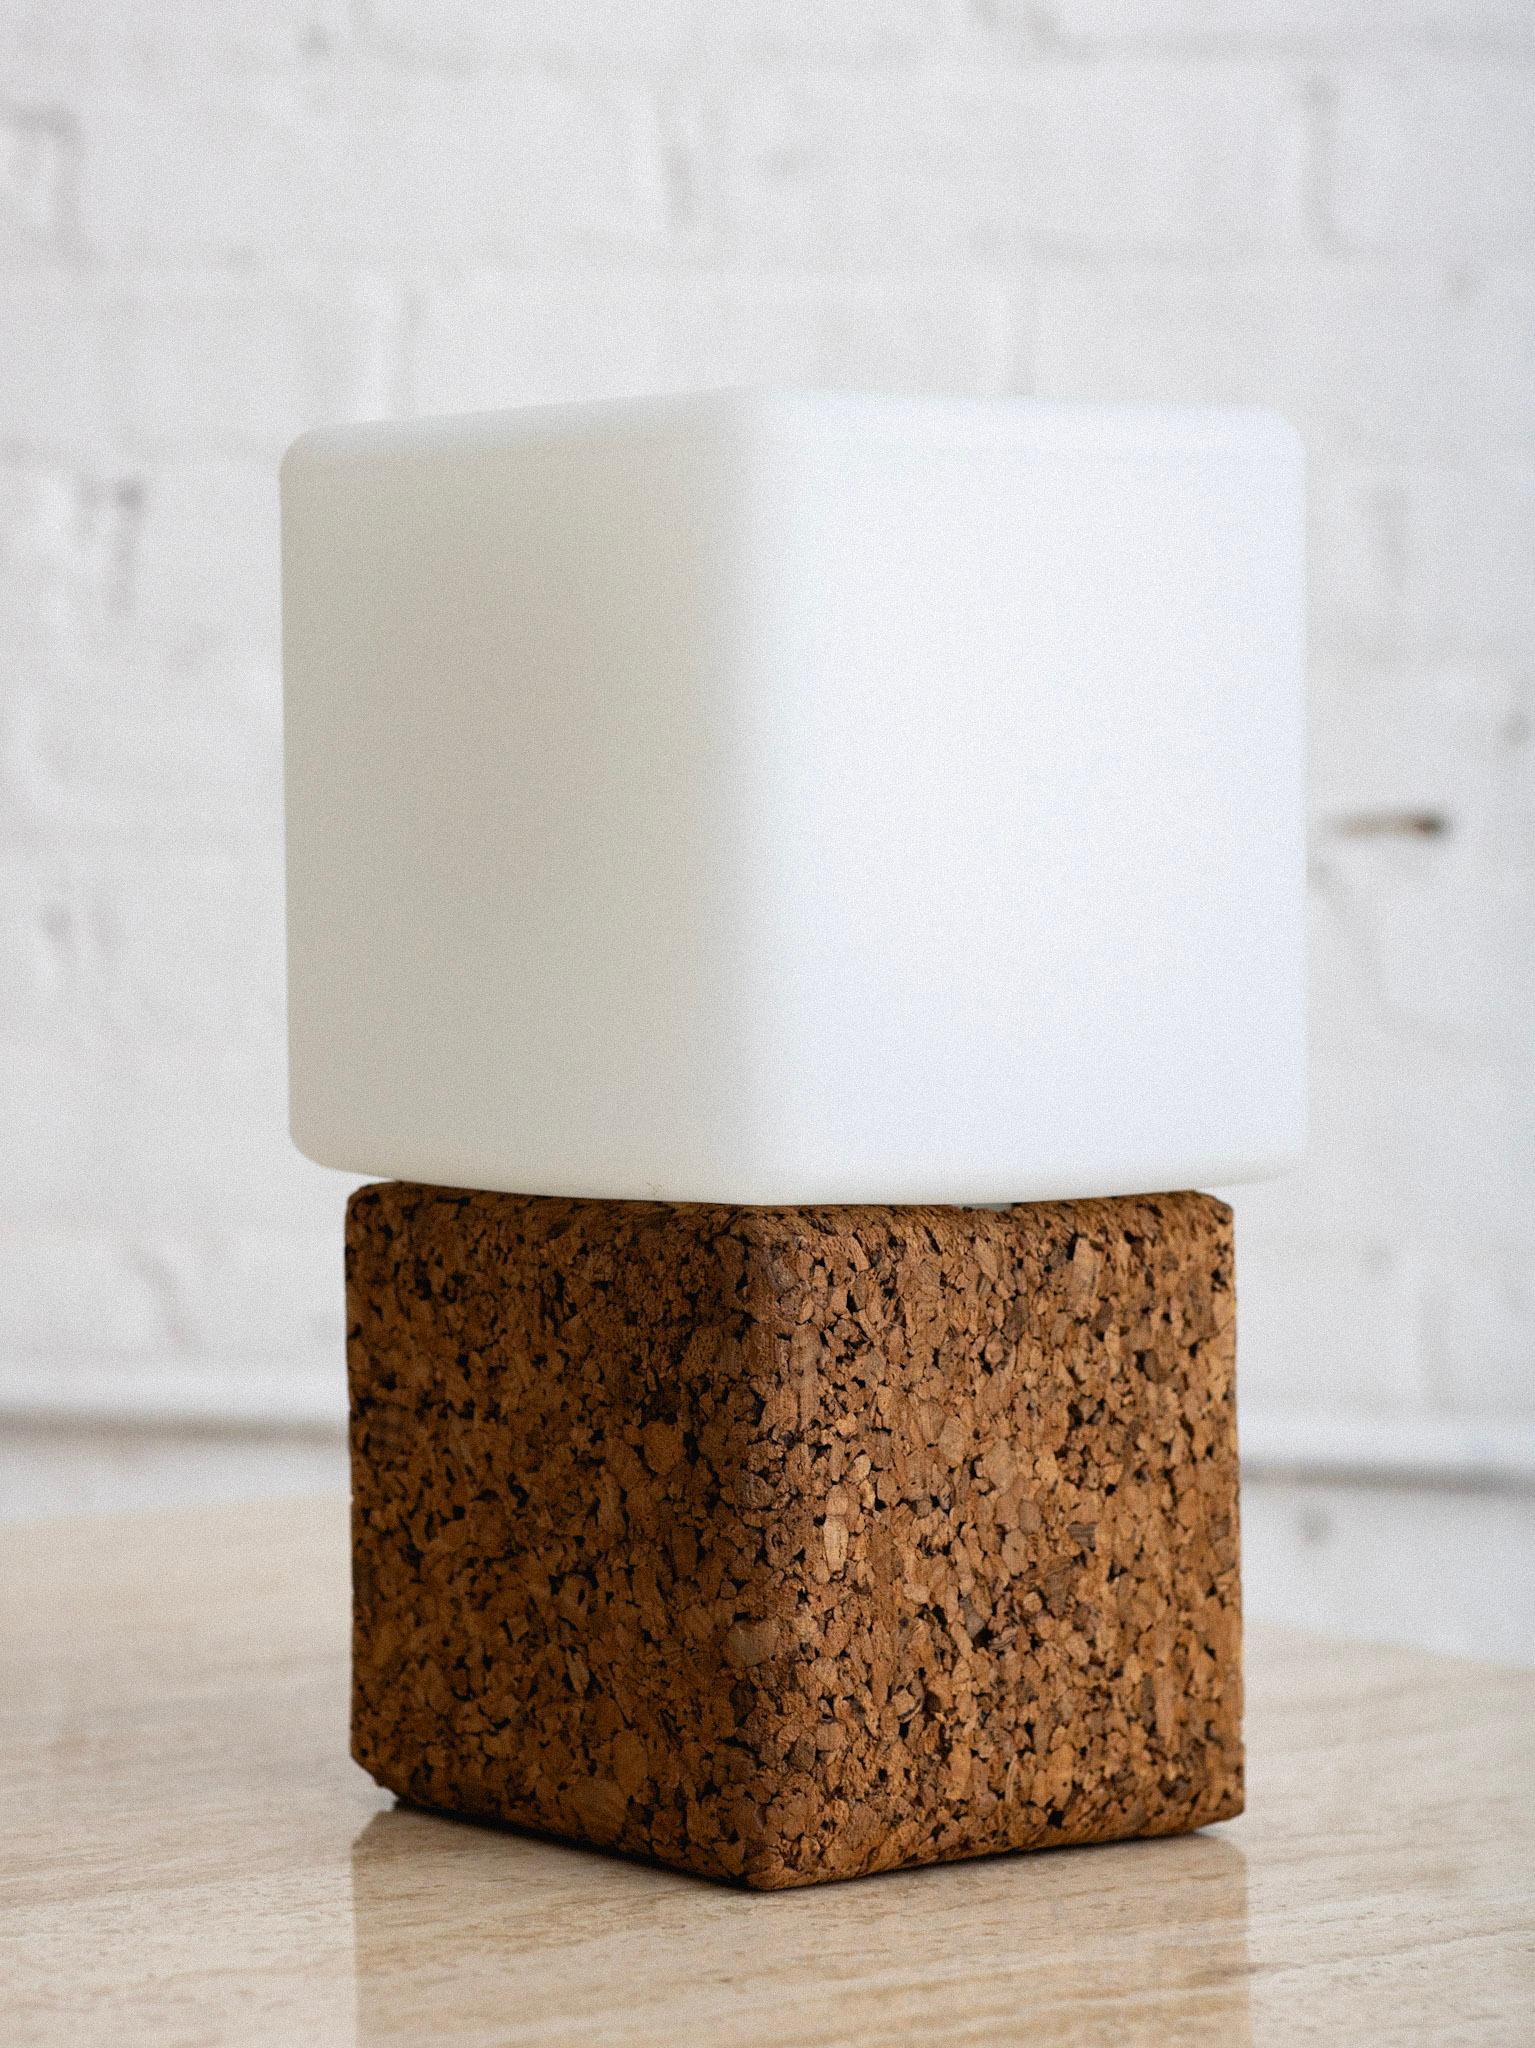 A mid century table lamp constructed of cork with a glass shade. Cube form silhouette. Upper glass simply rests over the lightbulb onto cork base.